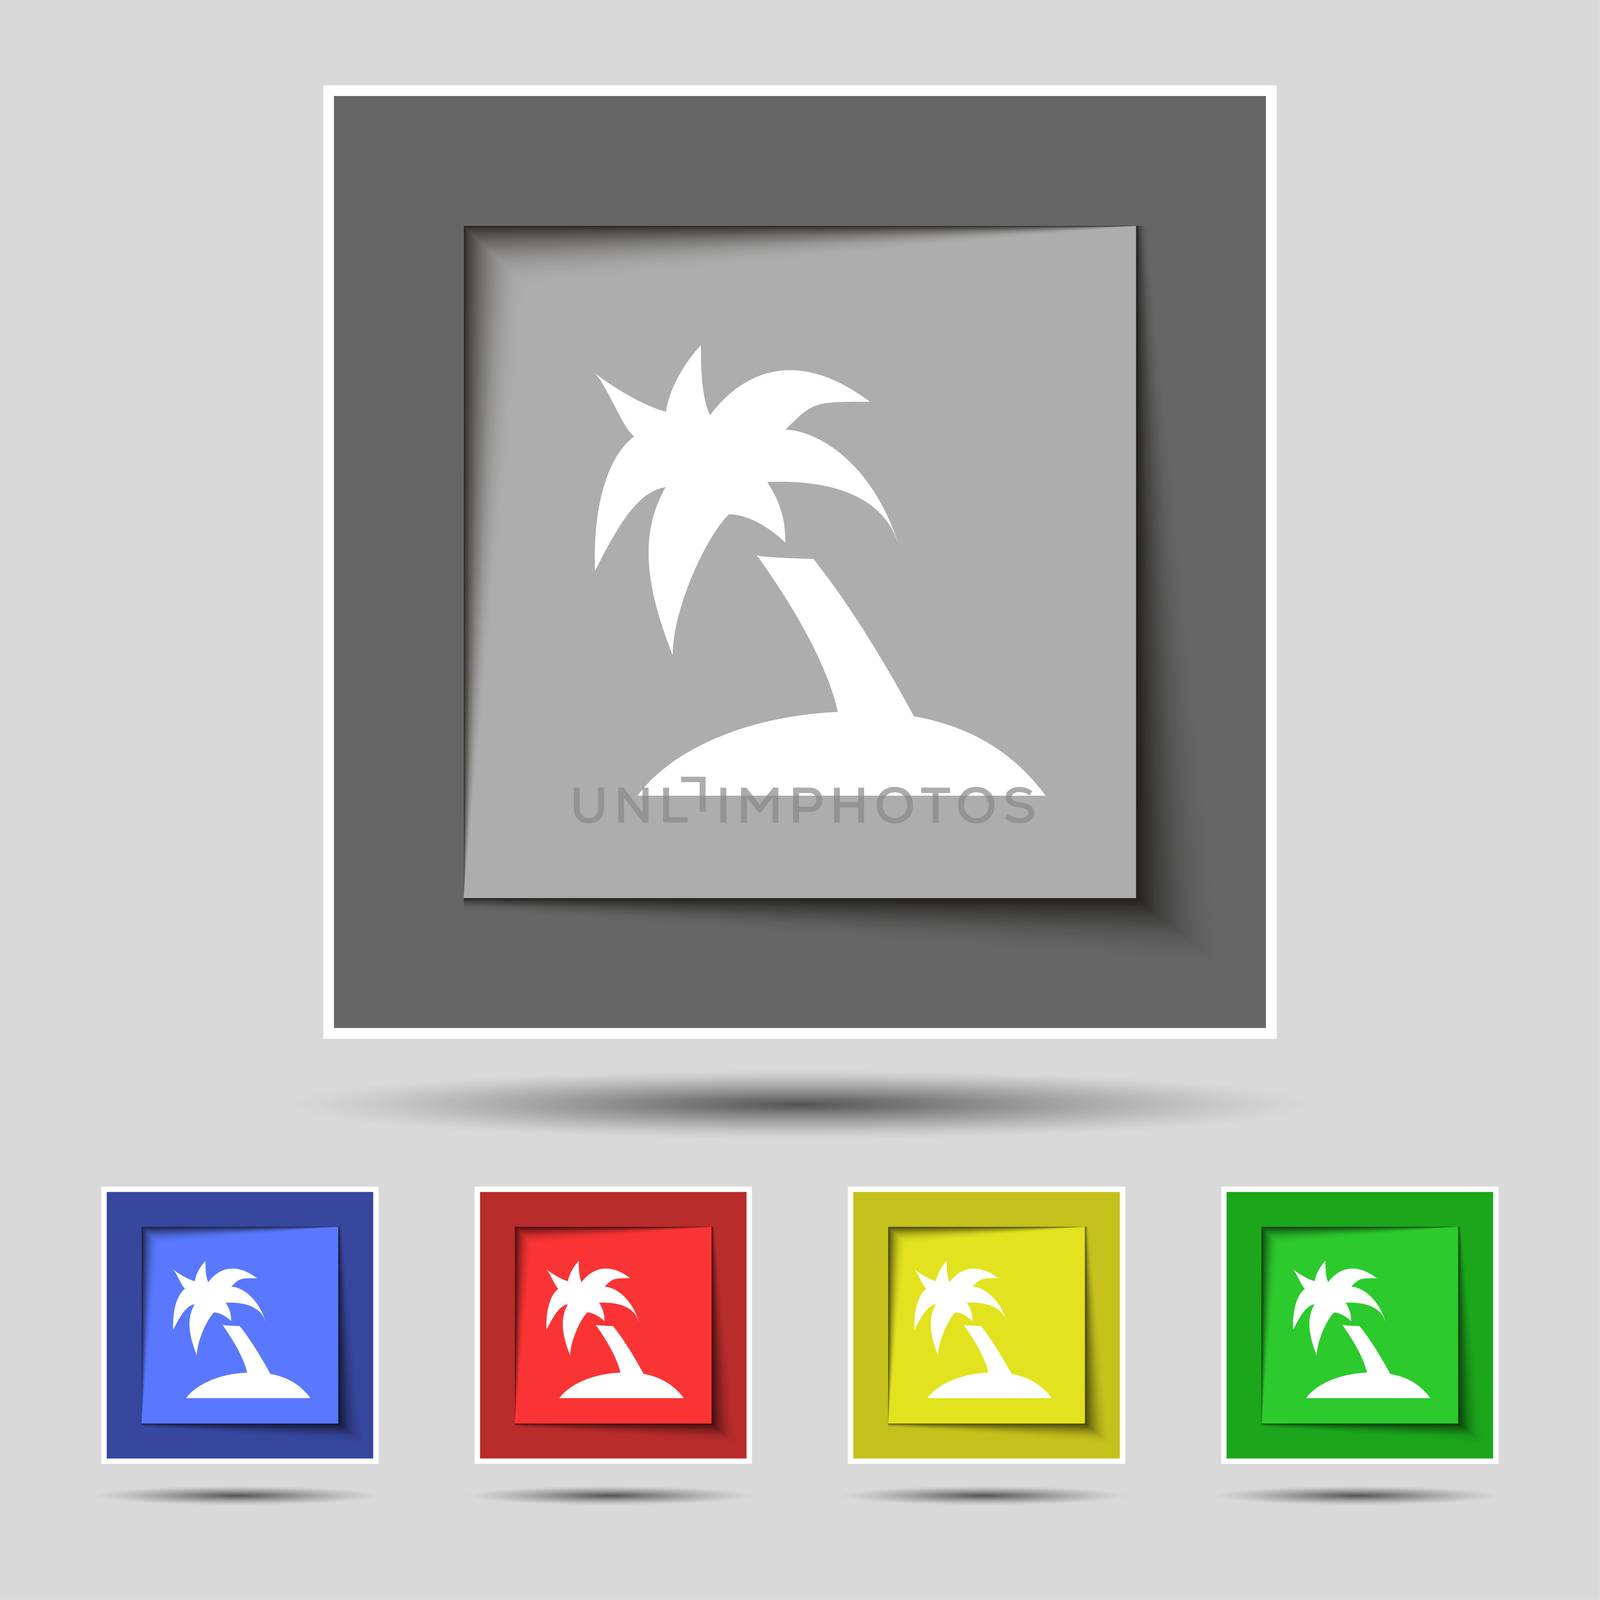 Palm Tree, Travel trip icon sign on the original five colored buttons. illustration